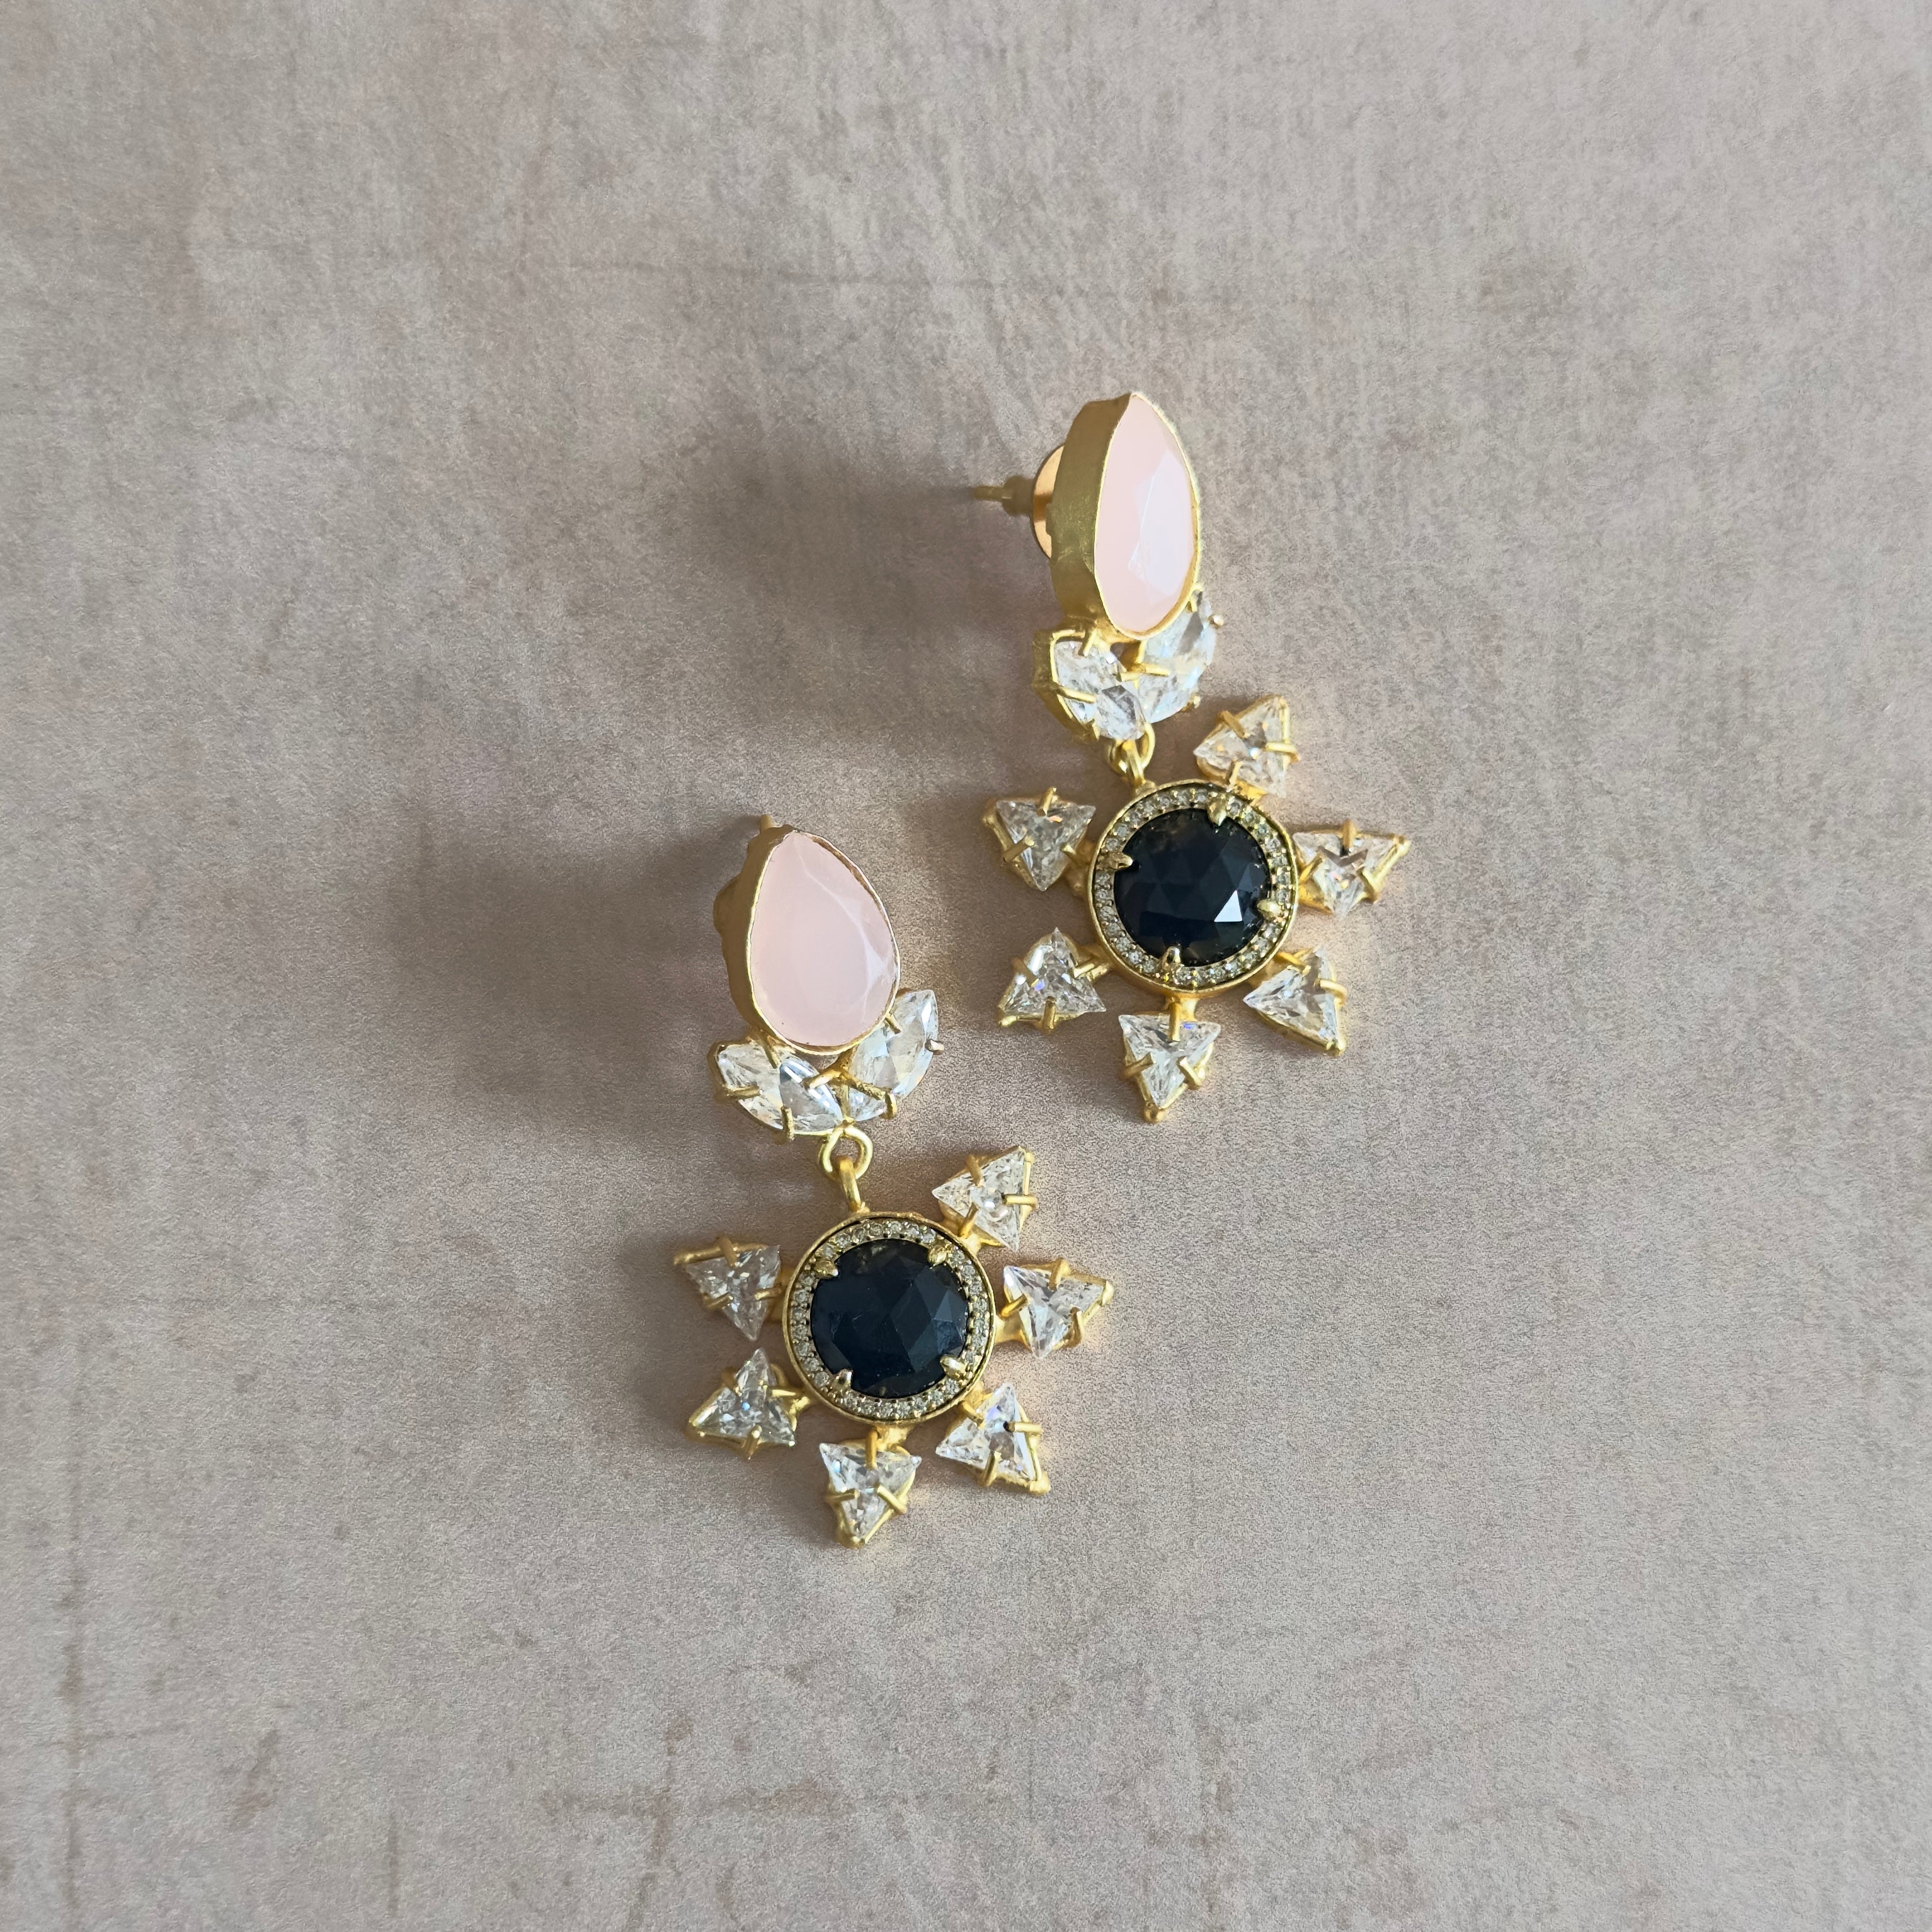 These Nelly Pink Drop Crystal Earrings are the perfect blend of sophistication and eye-catching style. The black onyx, pink stones, and CZ crystals come together to create a stunning combination that will elevate any outfit. Show off your unique sense of fashion with these must-have earrings.